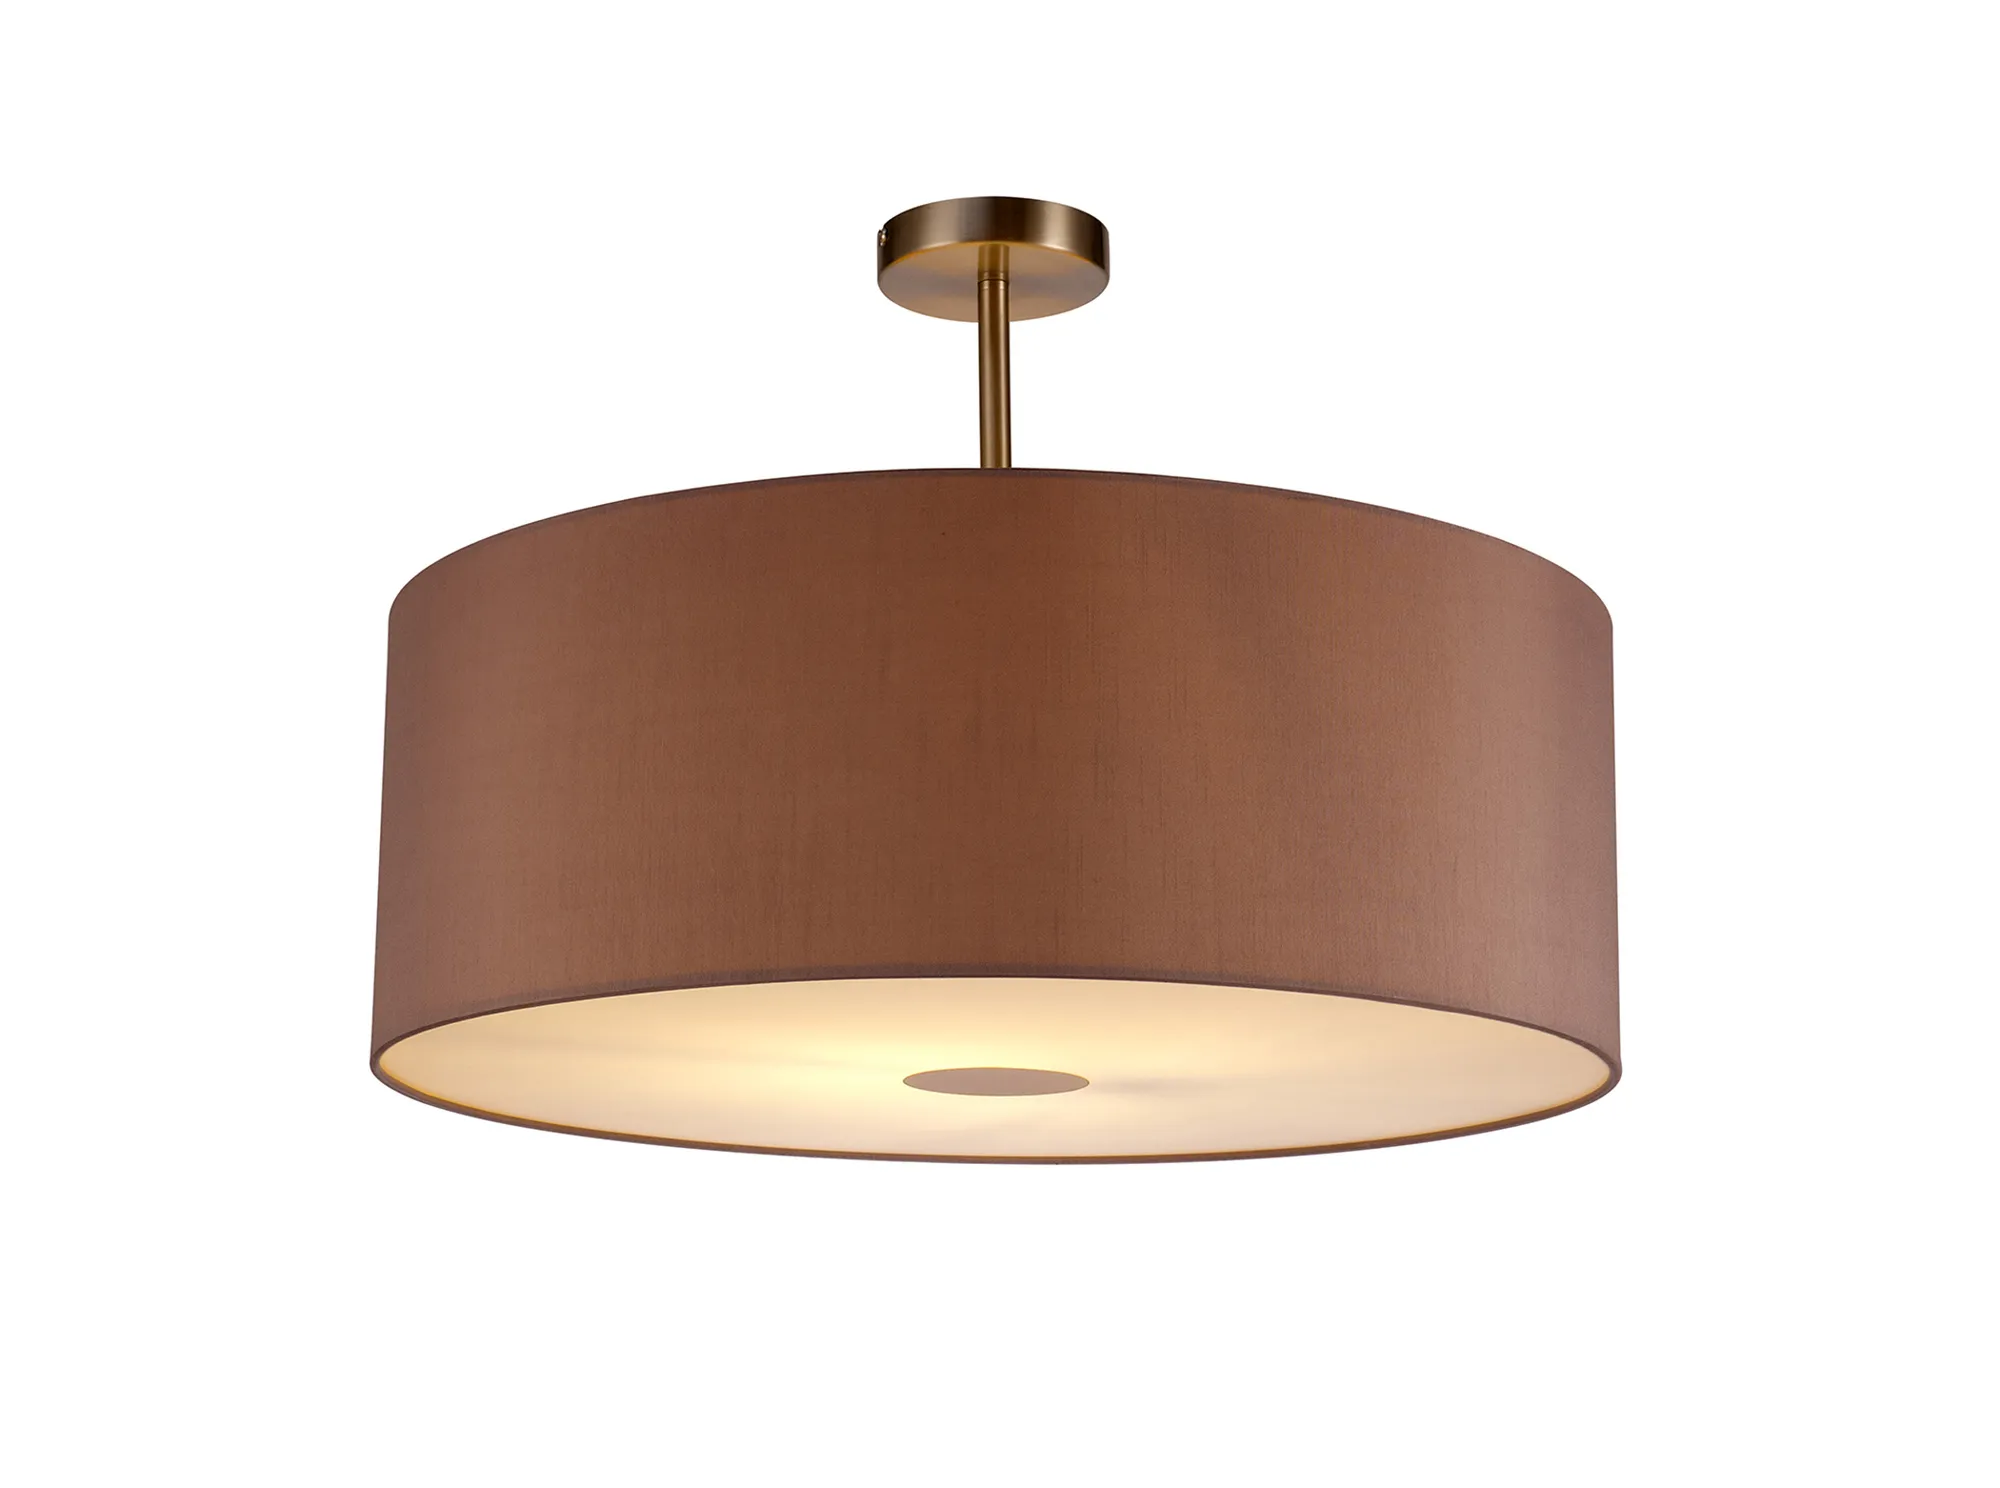 DK0273  Baymont 60cm Semi Flush 1 Light Satin Nickel, Taupe/Halo Gold, Frosted Diffuser